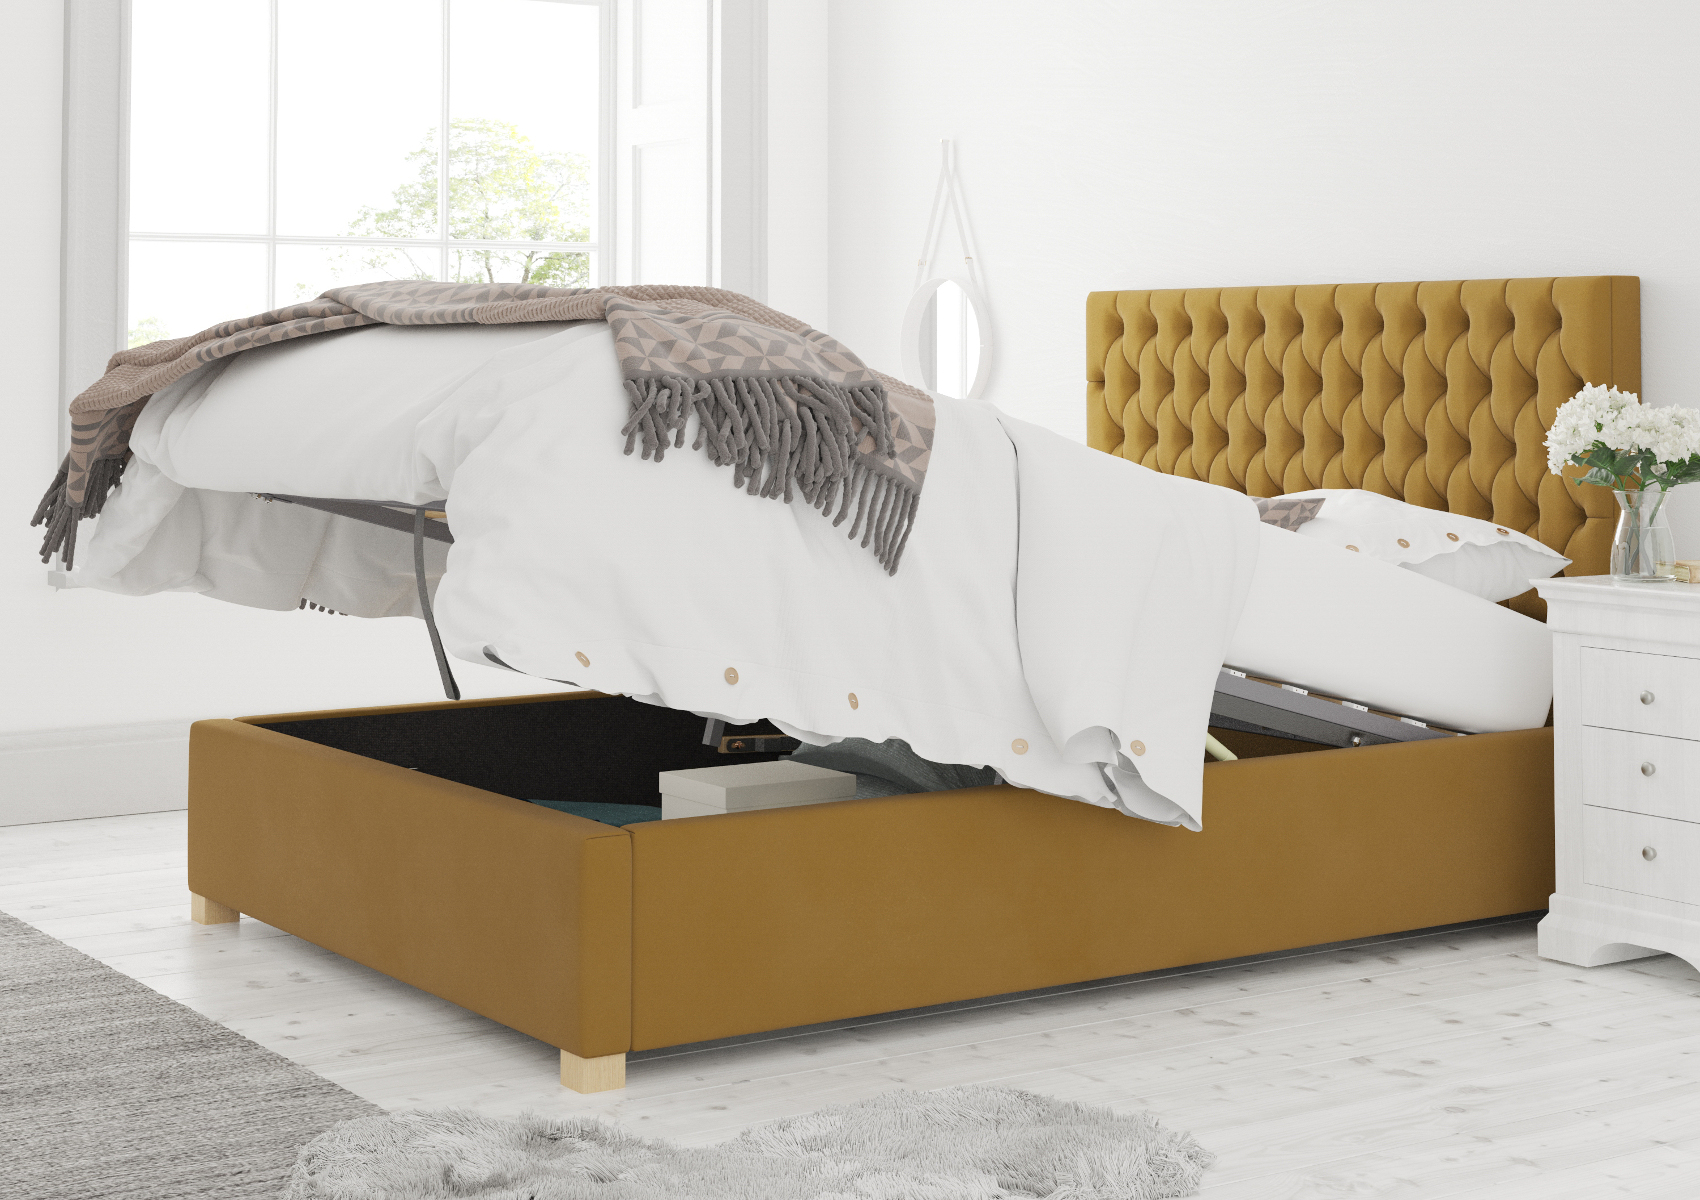 View Malton Ochre Upholstered Compact Double Ottoman Bed Time4Sleep information